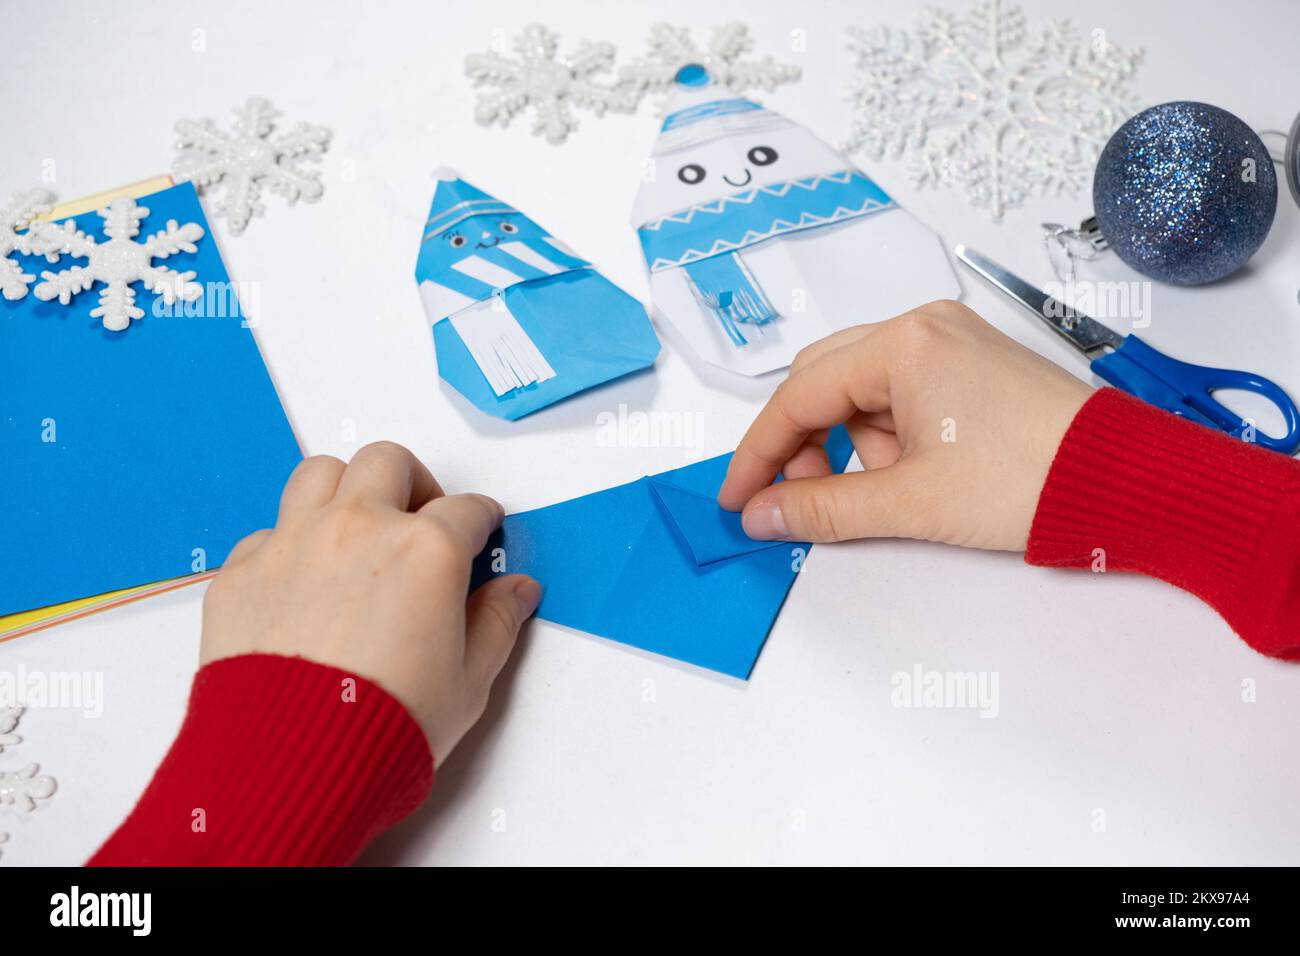 Creation of origami crafts from paper for Christmas and New Year, figurine of snowmen. Stock Photo